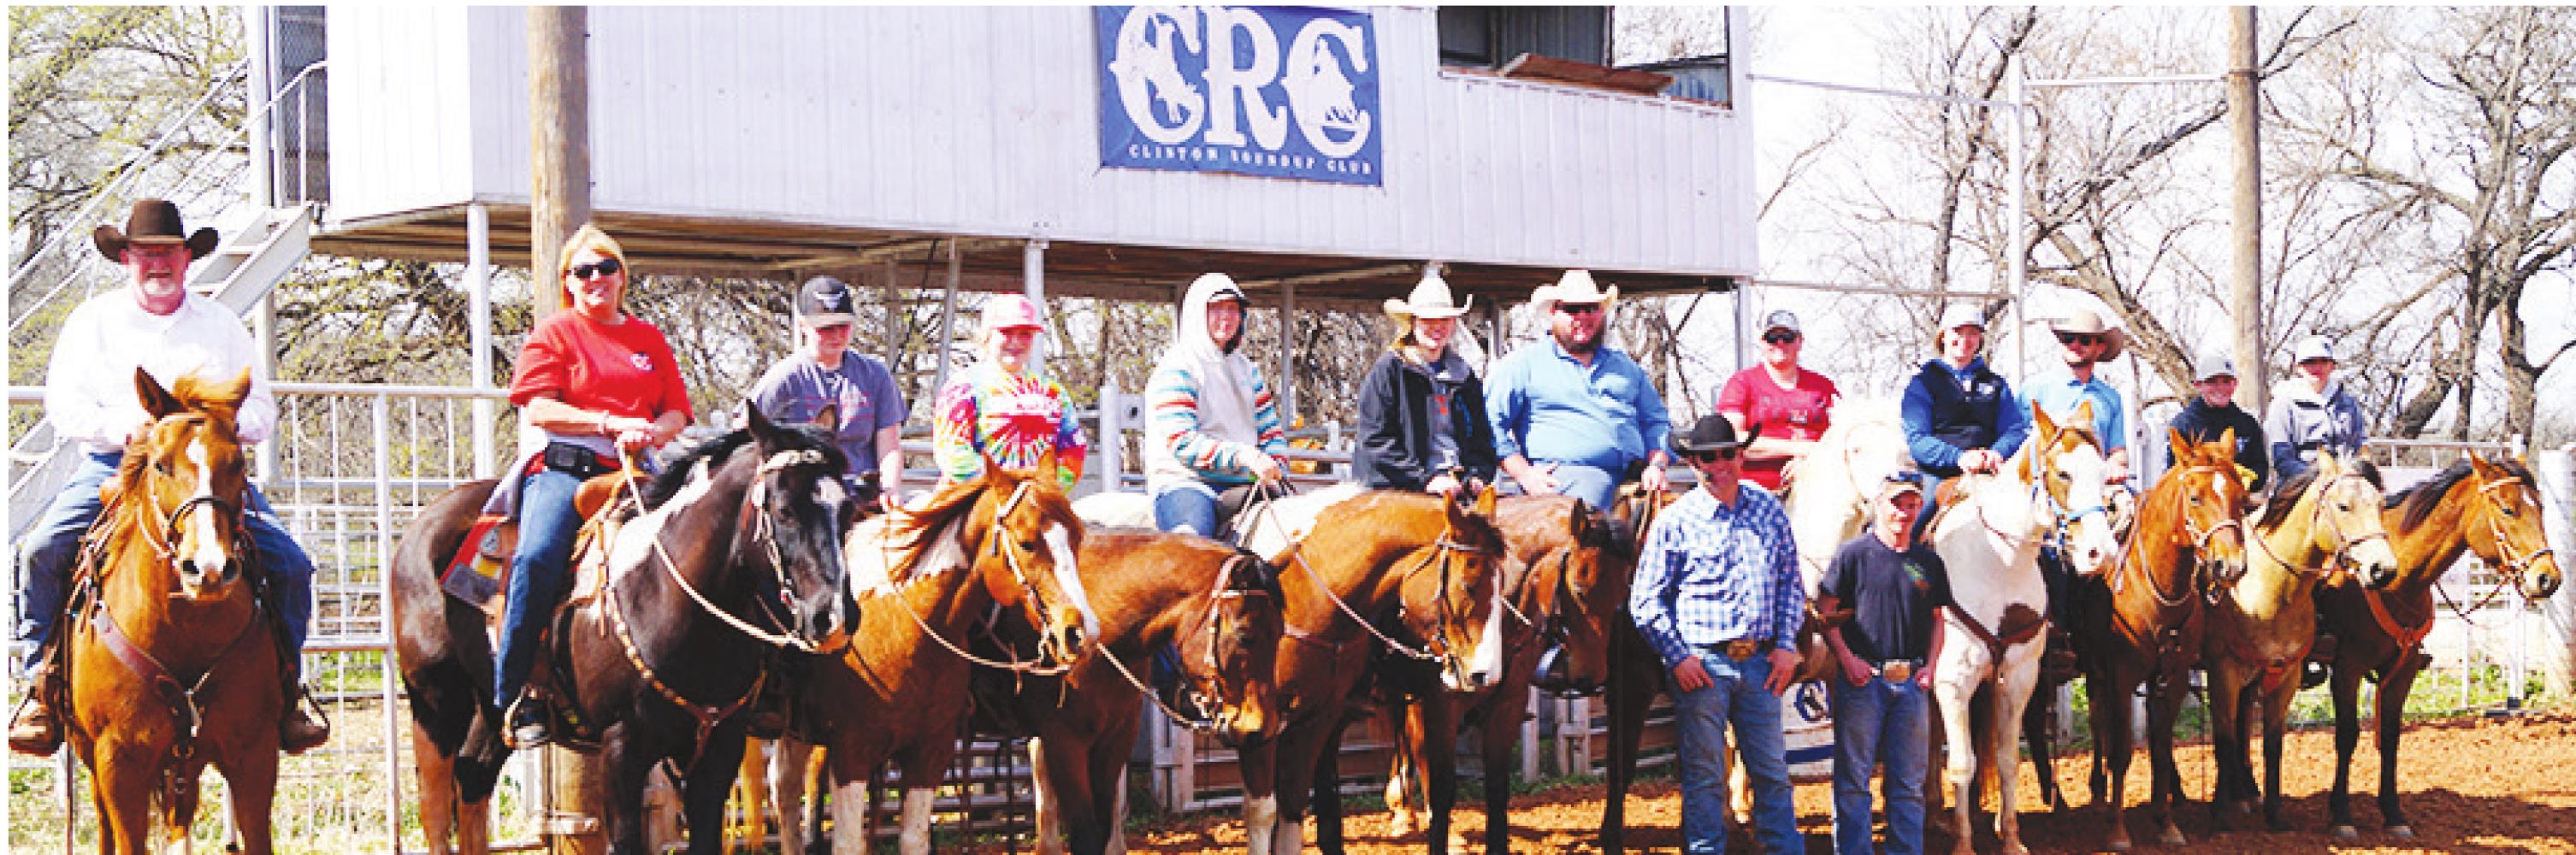 Rodeo visitor Clinton Daily News